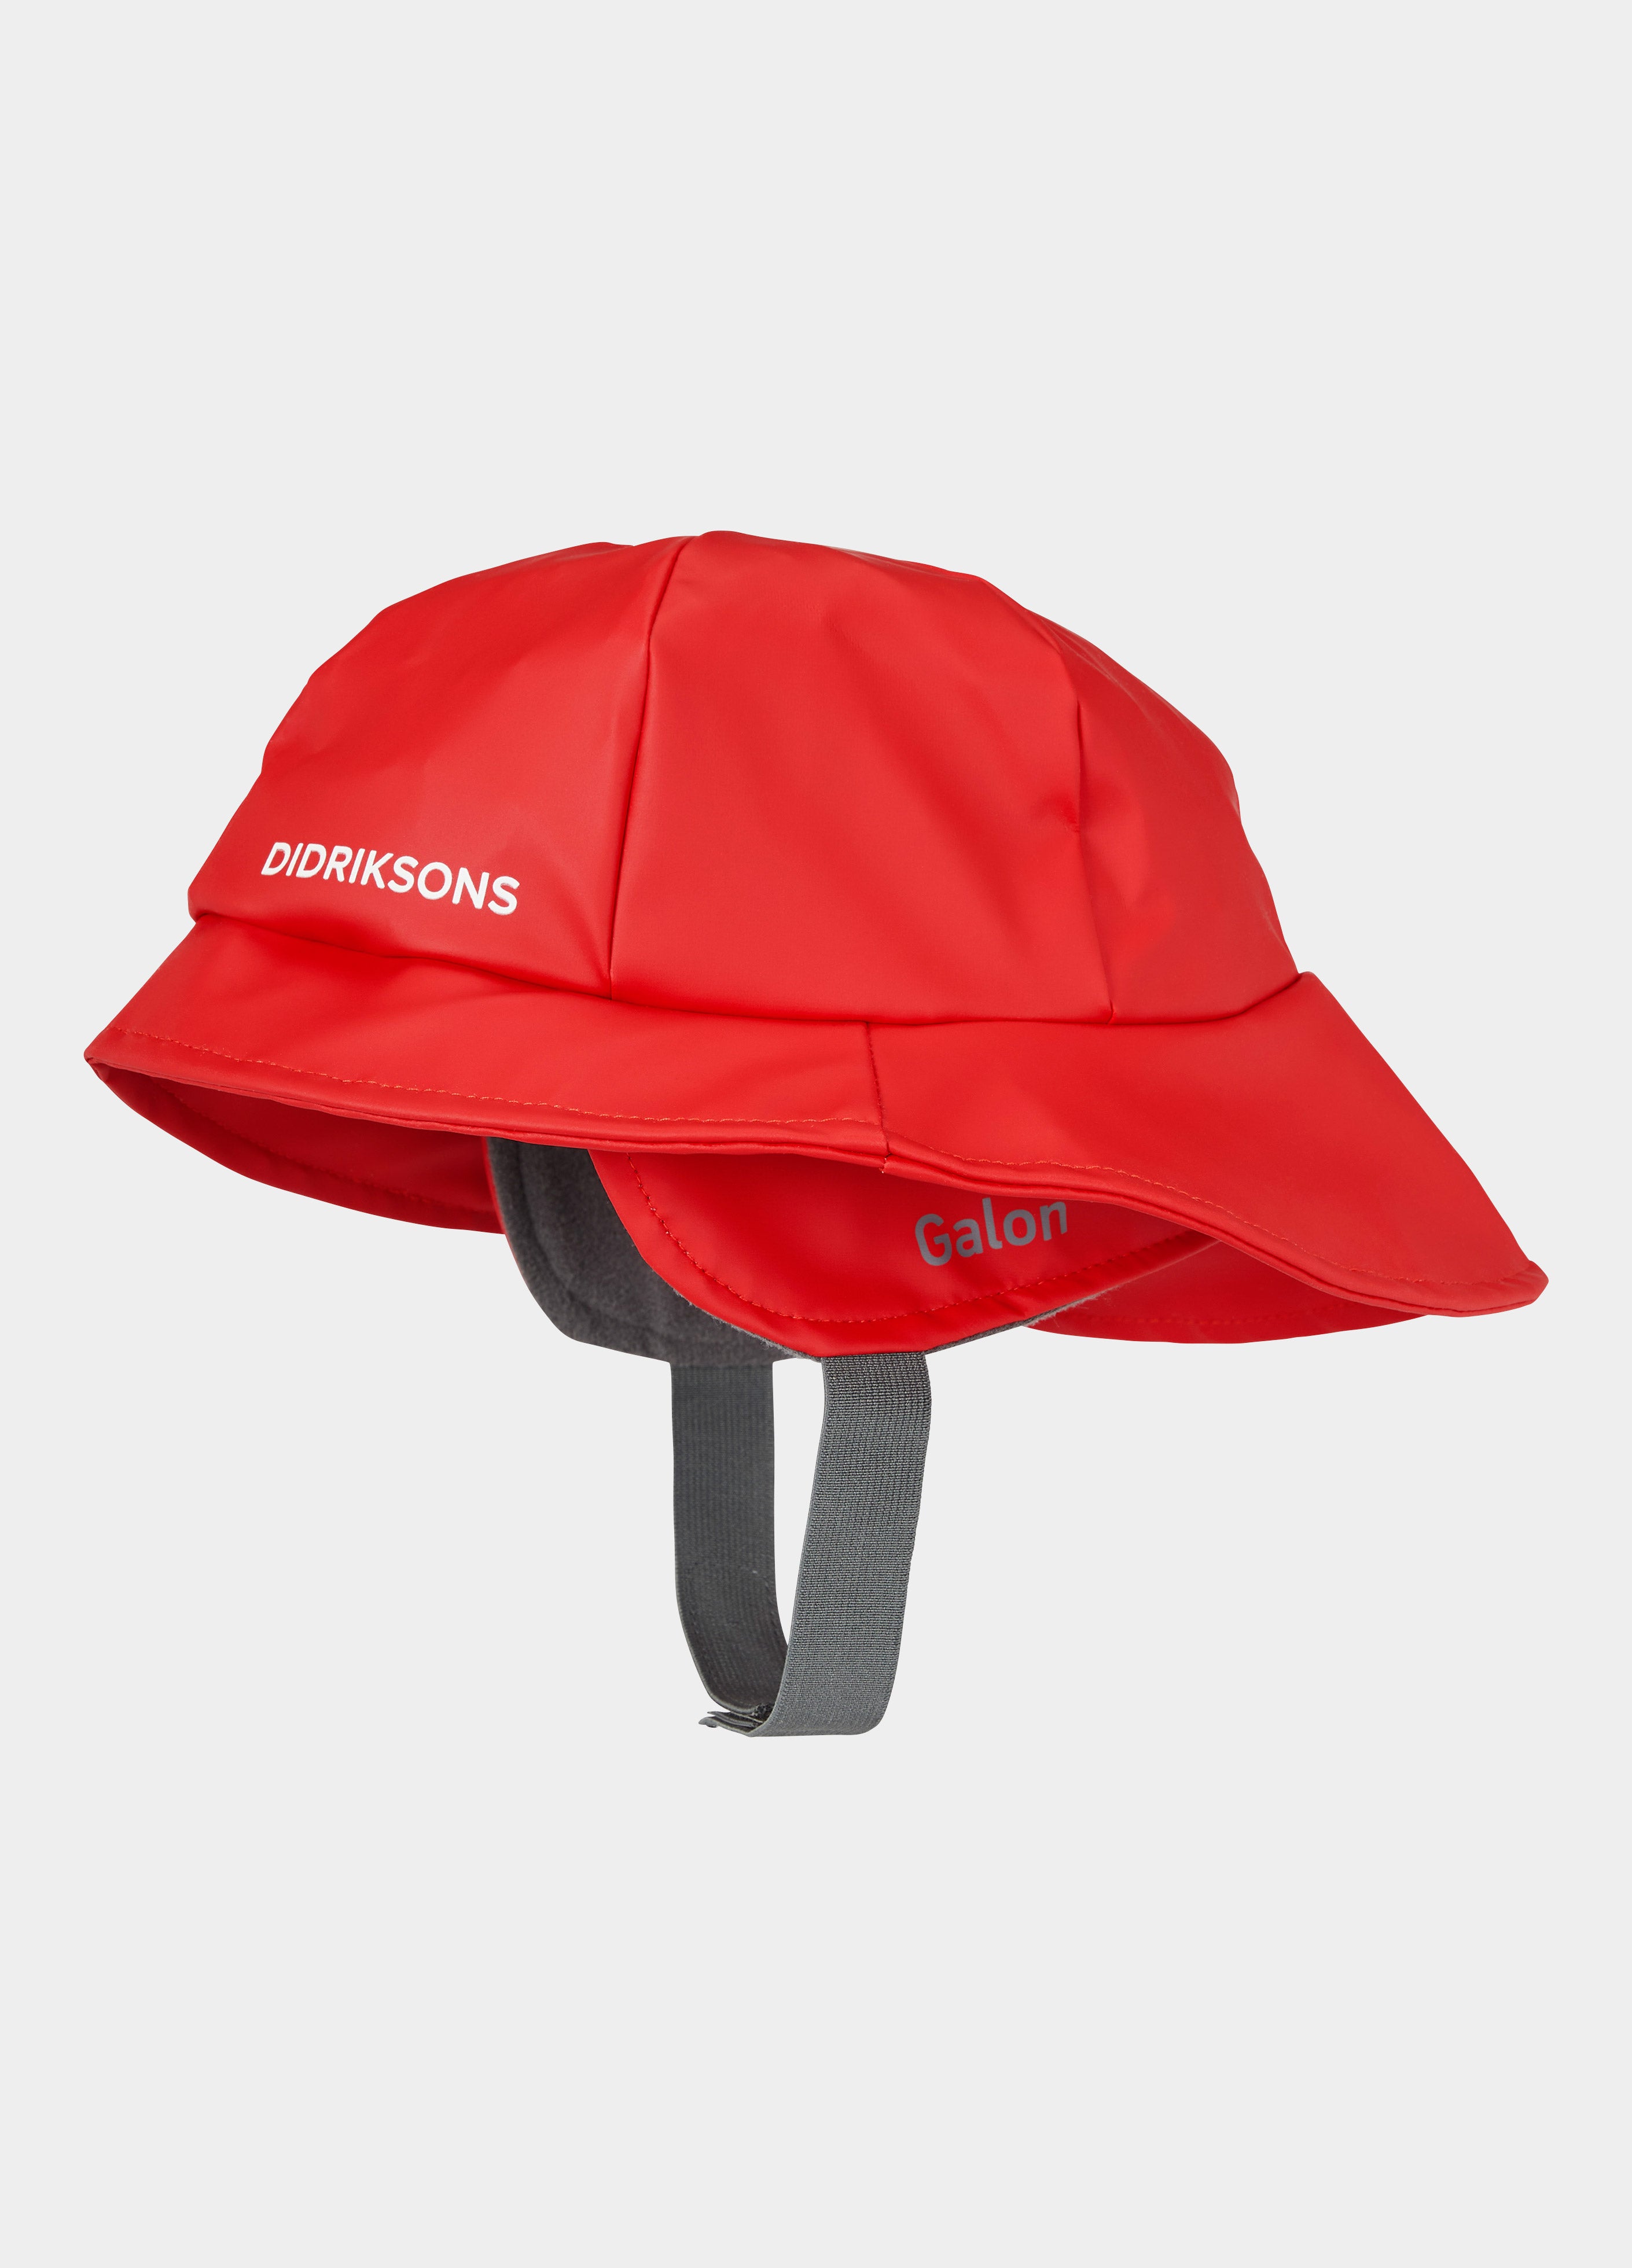 Didriksons Southwest Kids Galon in Chilli Red 